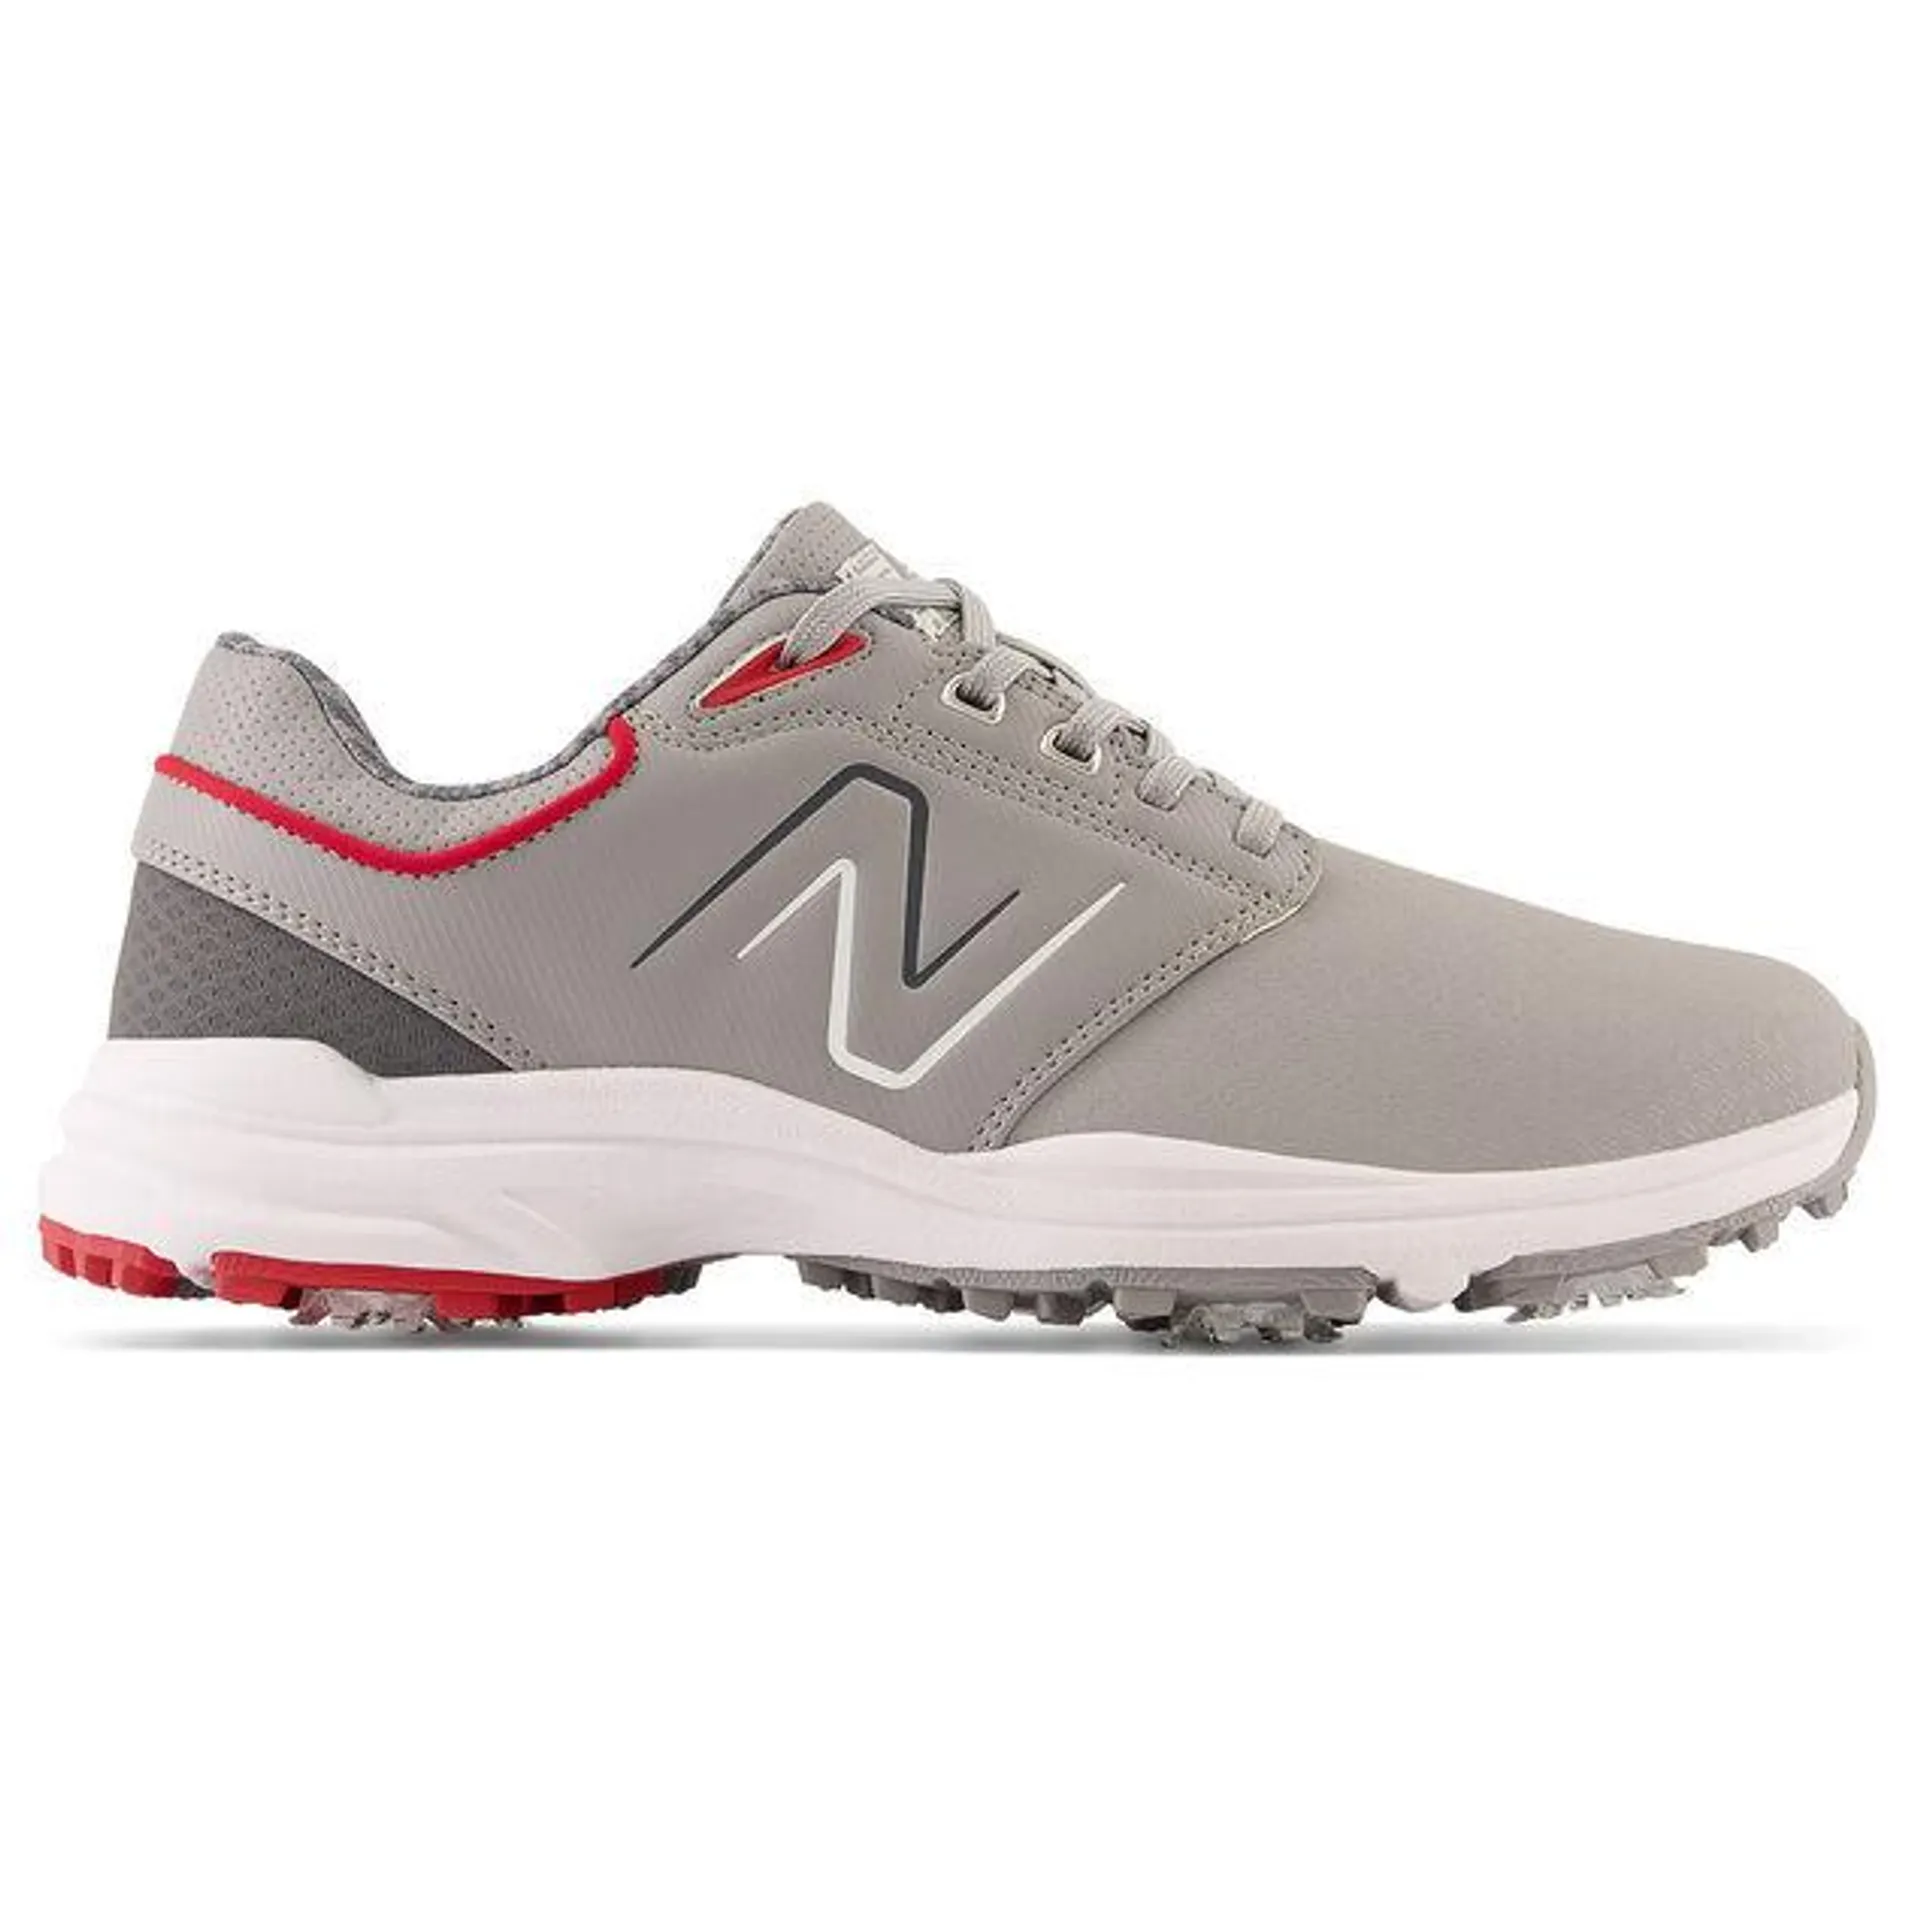 New Balance Men's Brighton Waterproof Spiked Golf Shoes